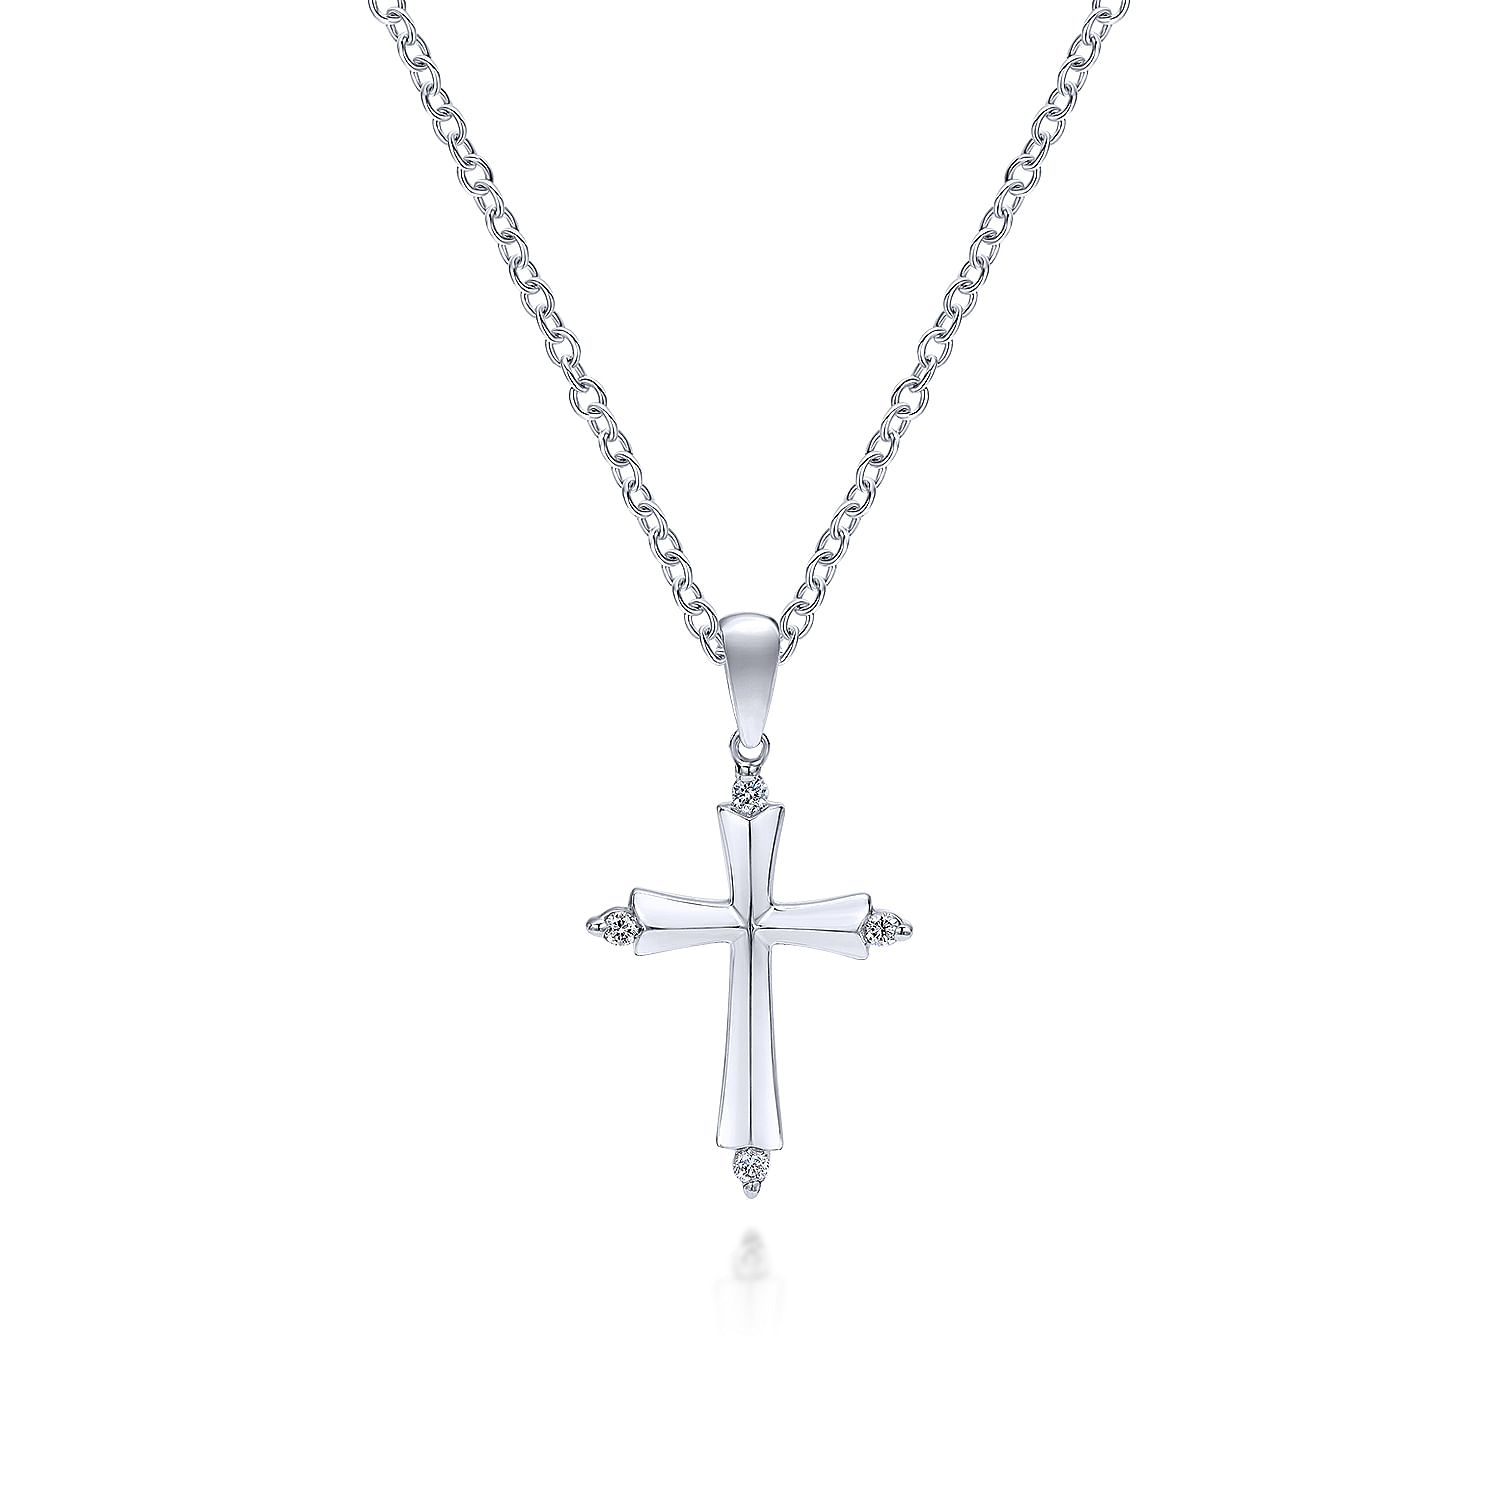 14K White Gold Knife-Edge Cross Pendant Necklace with Diamond Accents